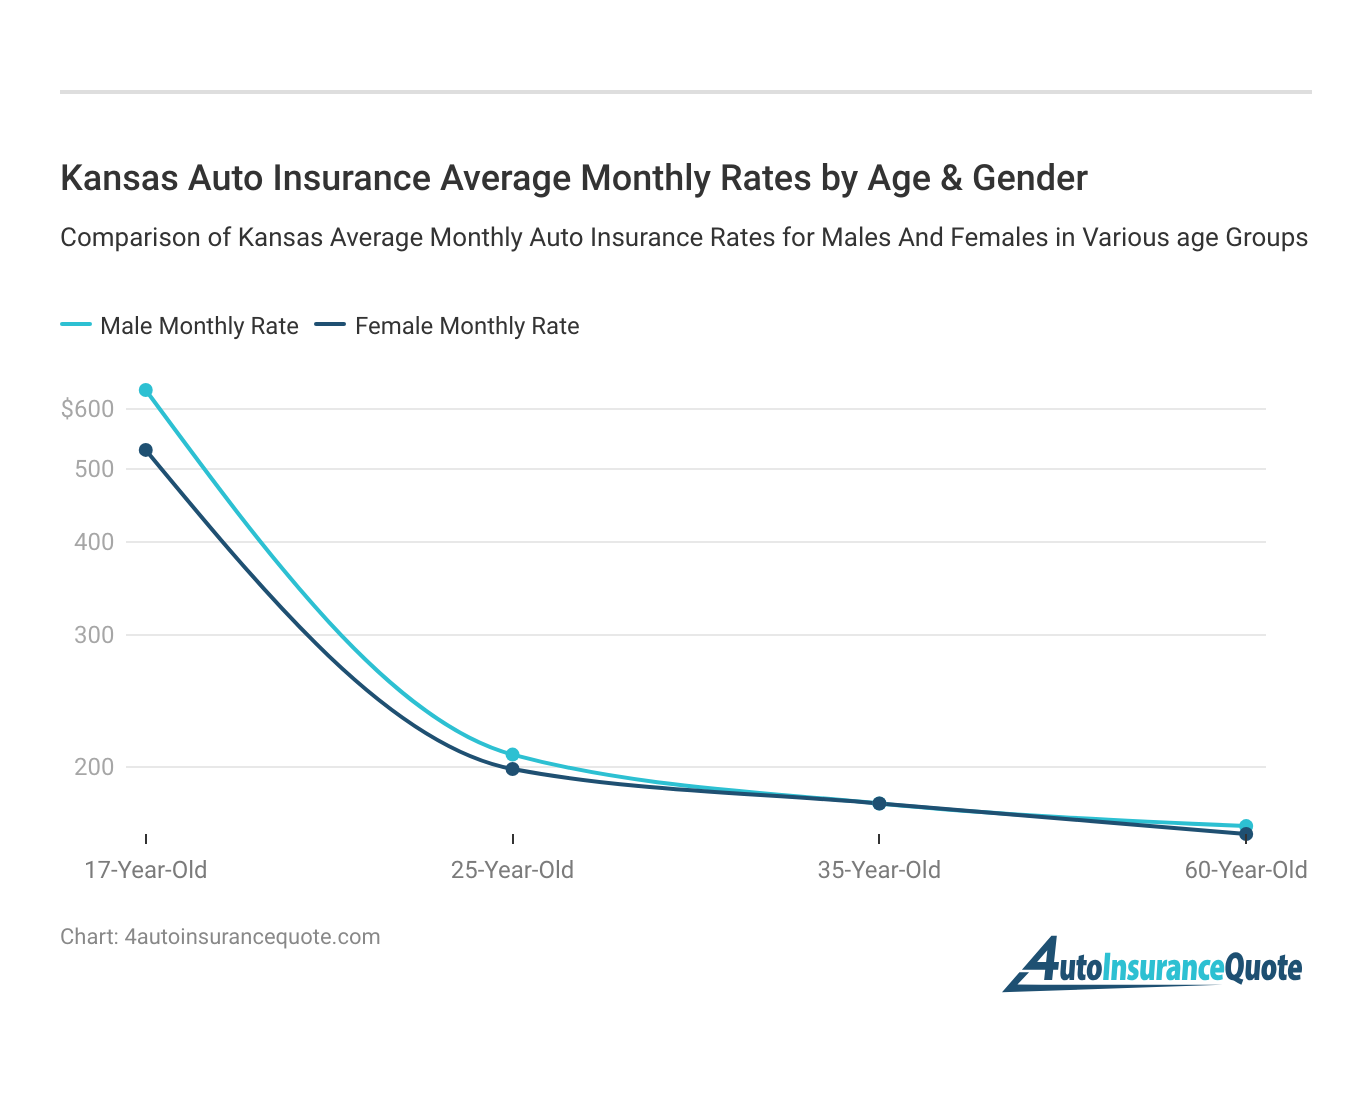 <h3>Kansas Auto Insurance Average Monthly Rates by Age & Gender</h3>